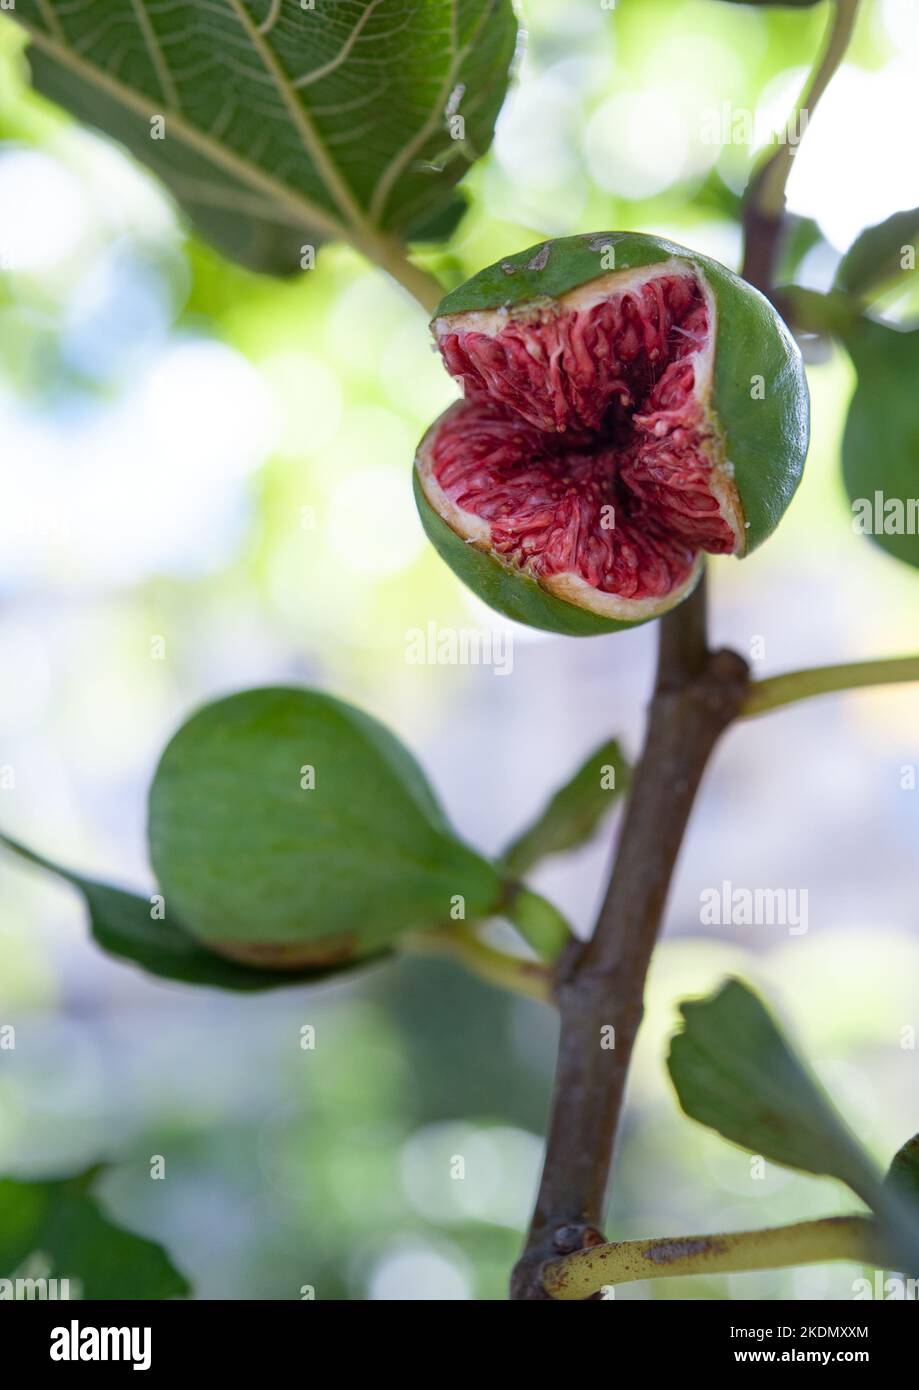 Ripe fruit of the fig tree. Stock Photo